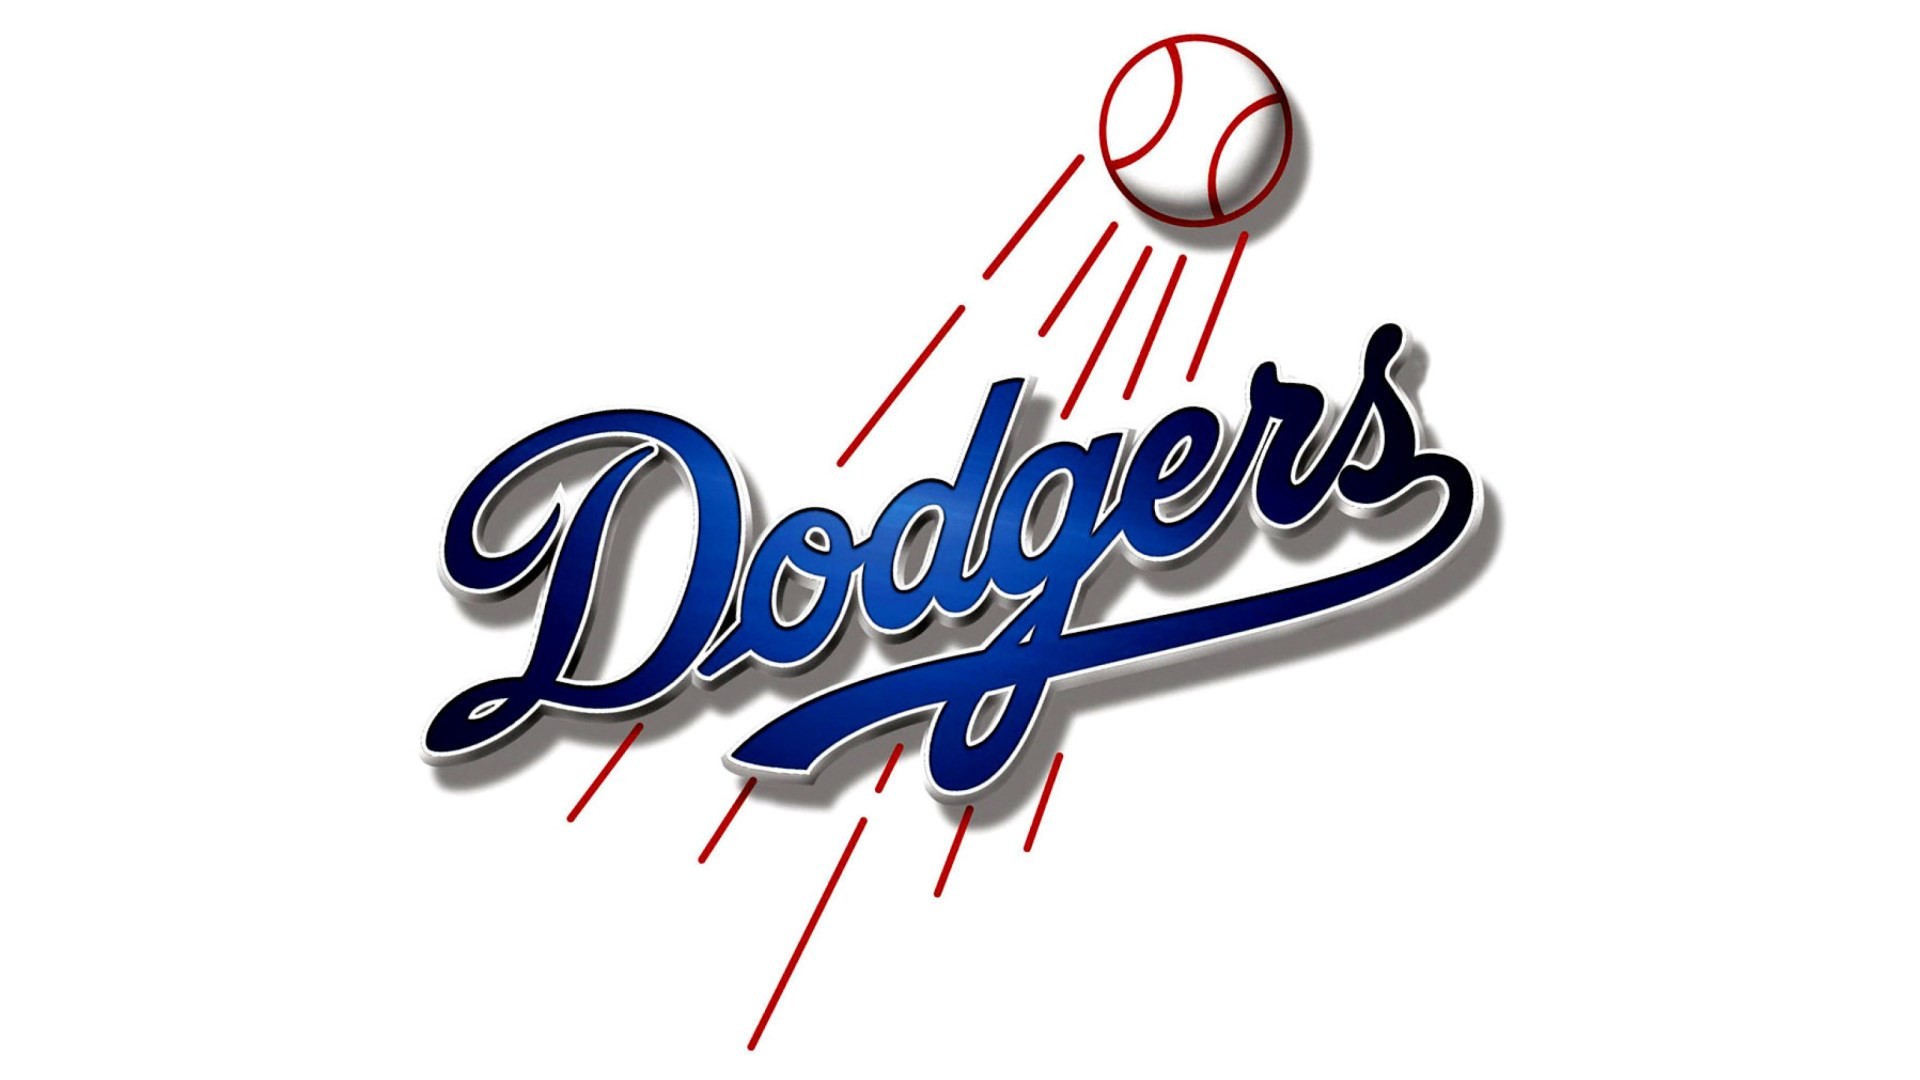 Los Angeles Dodgers IPhone Wallpaper 61 Pictures.